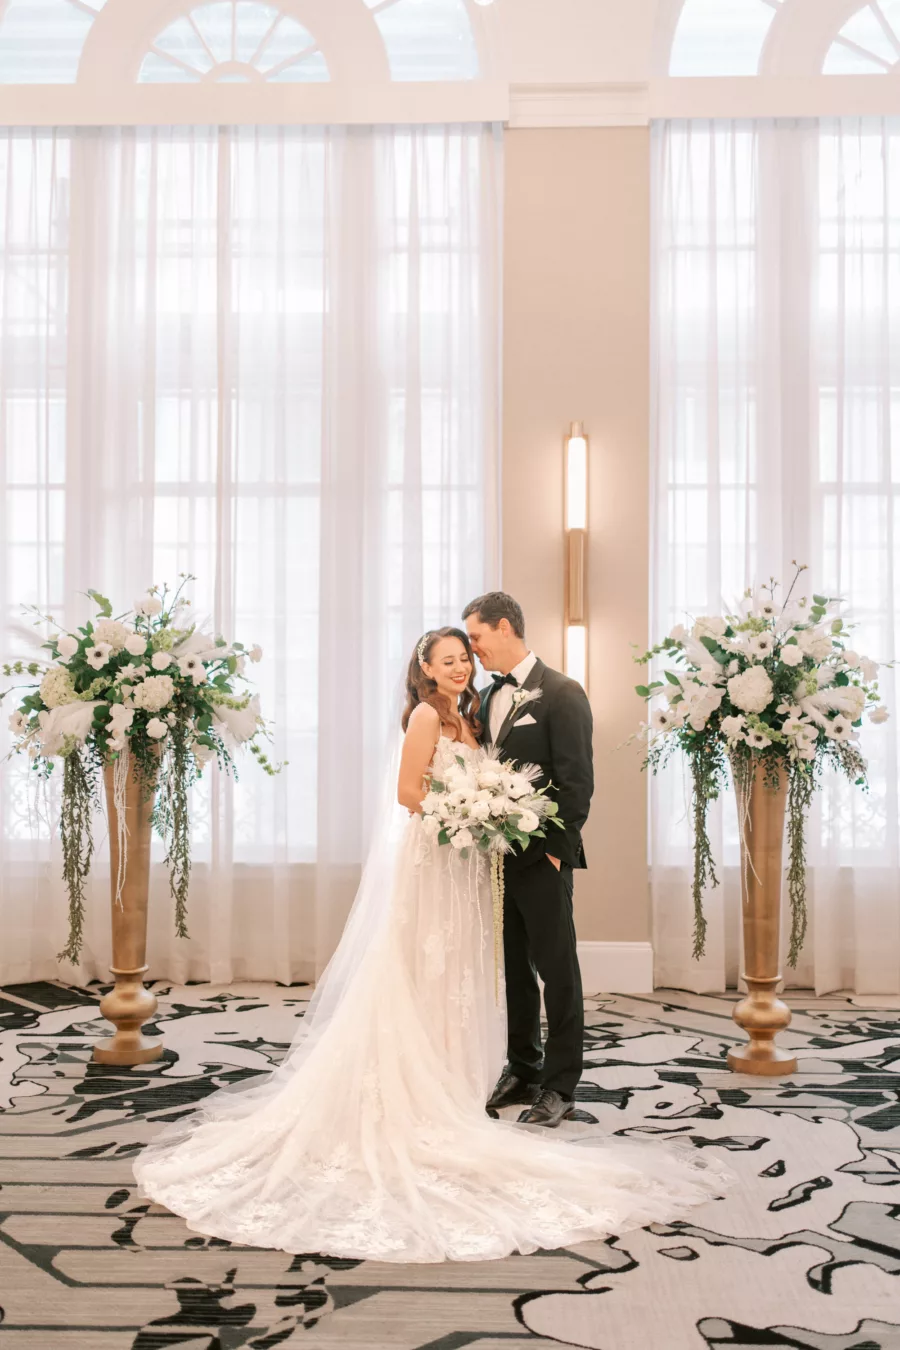 Elegant Great Gatsby Wedding Ceremony Inspiration | Nude and Ivory Beaded Lace A-line Wedding Dress Ideas | Tampa Bay Event Venue Hotel Flor | Boutique Truly Forever Bridal Tampa | Photographer Eddy Almaguer Photography | Videographer Priceless Studio Design